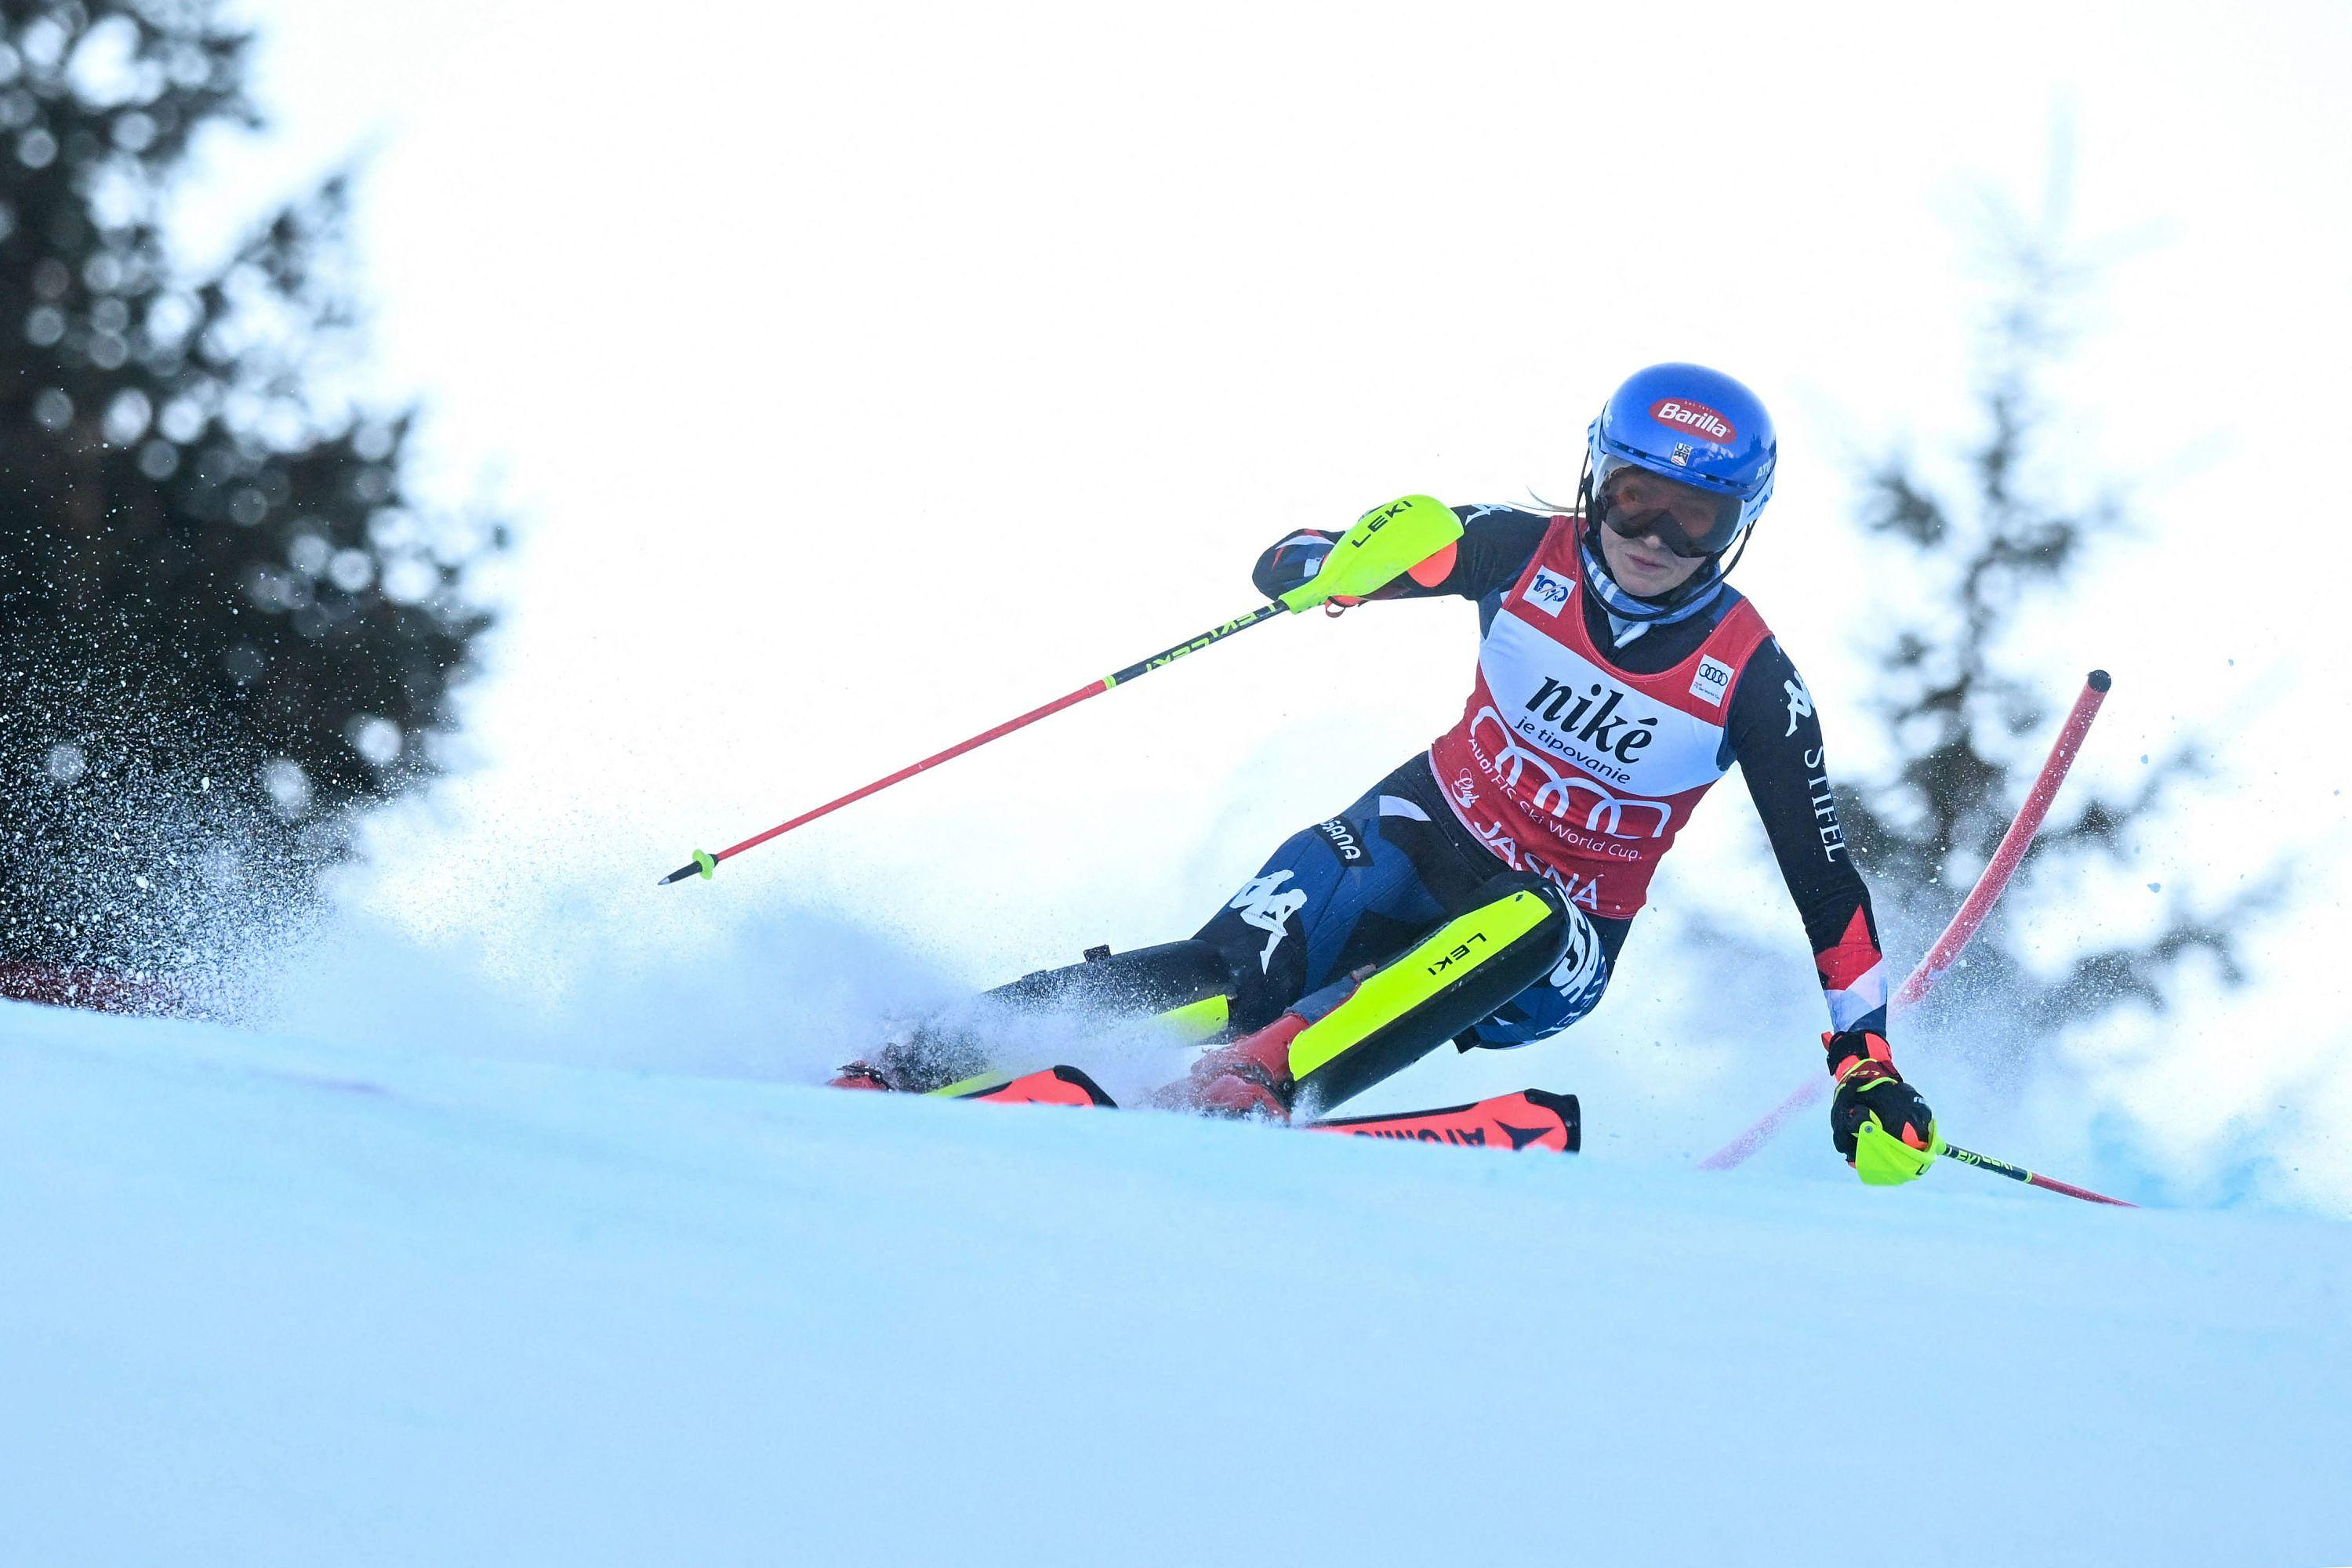 Alpine skiing: “I’m really relieved that it’s not so serious, even if I hurt everywhere,” breathes Shiffrin